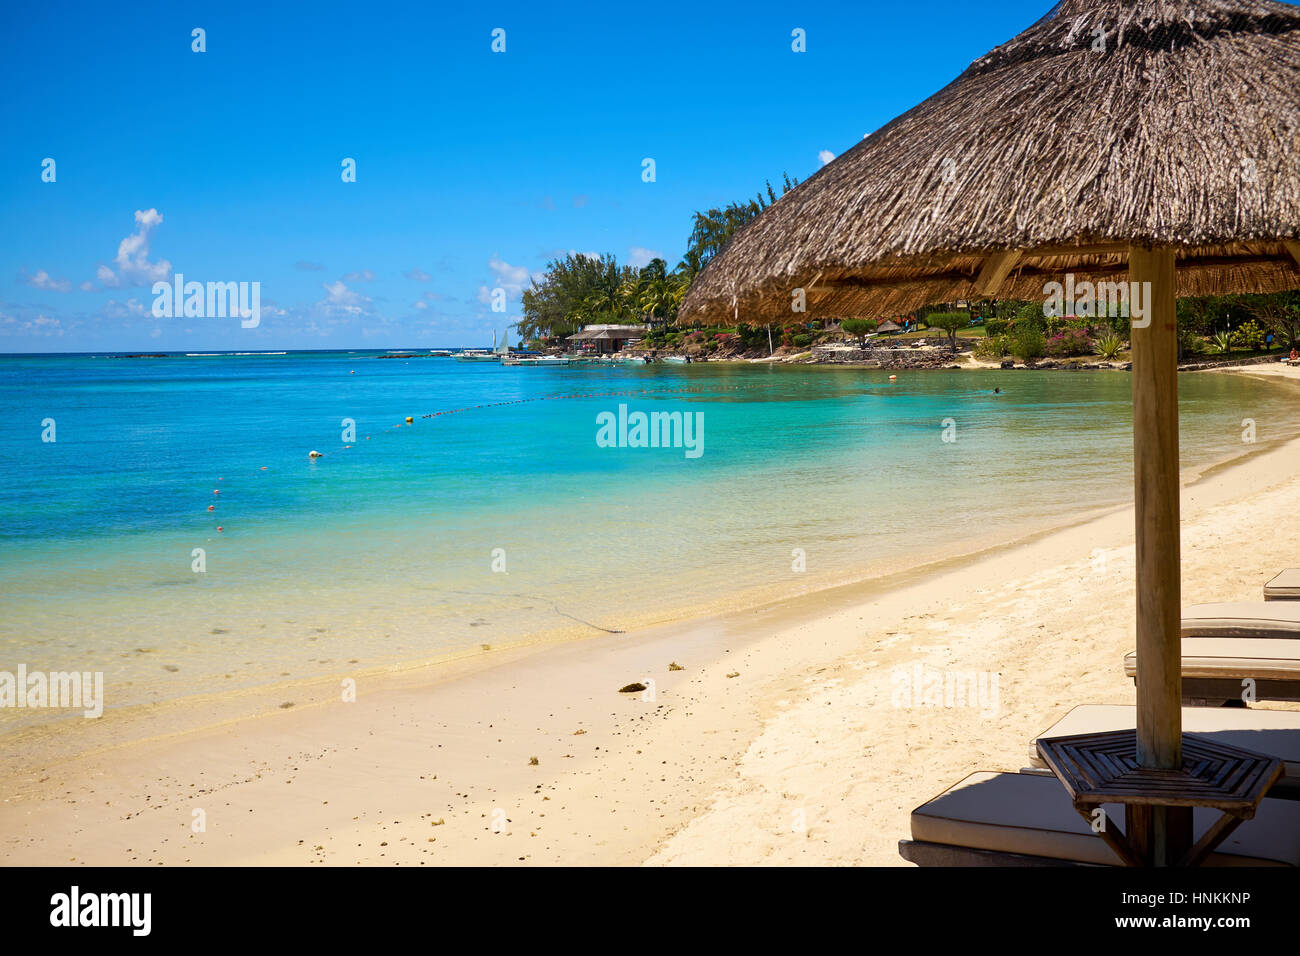 White sand beach with lounge chairs and umbrellas in Mauritius I Stock Photo